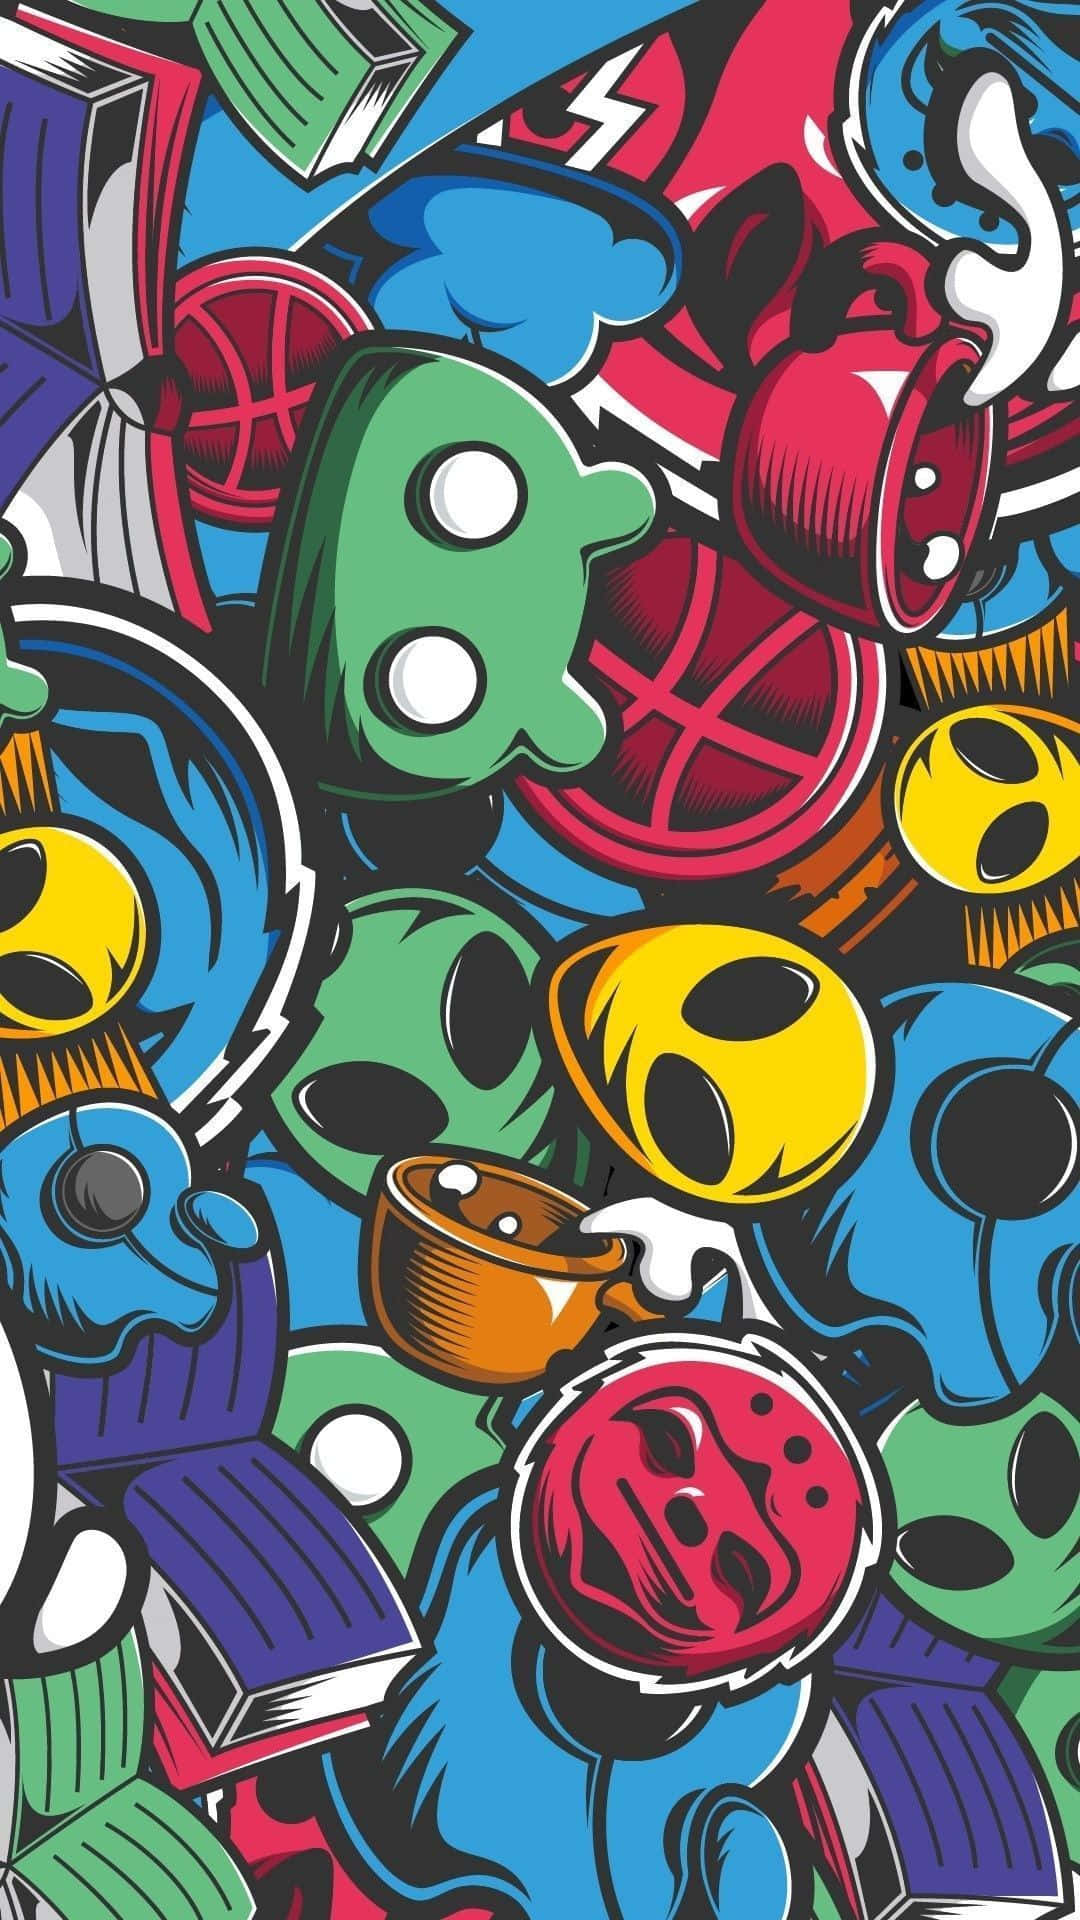 Get creative with your phone and make it stand out - The Bape Iphone! Wallpaper